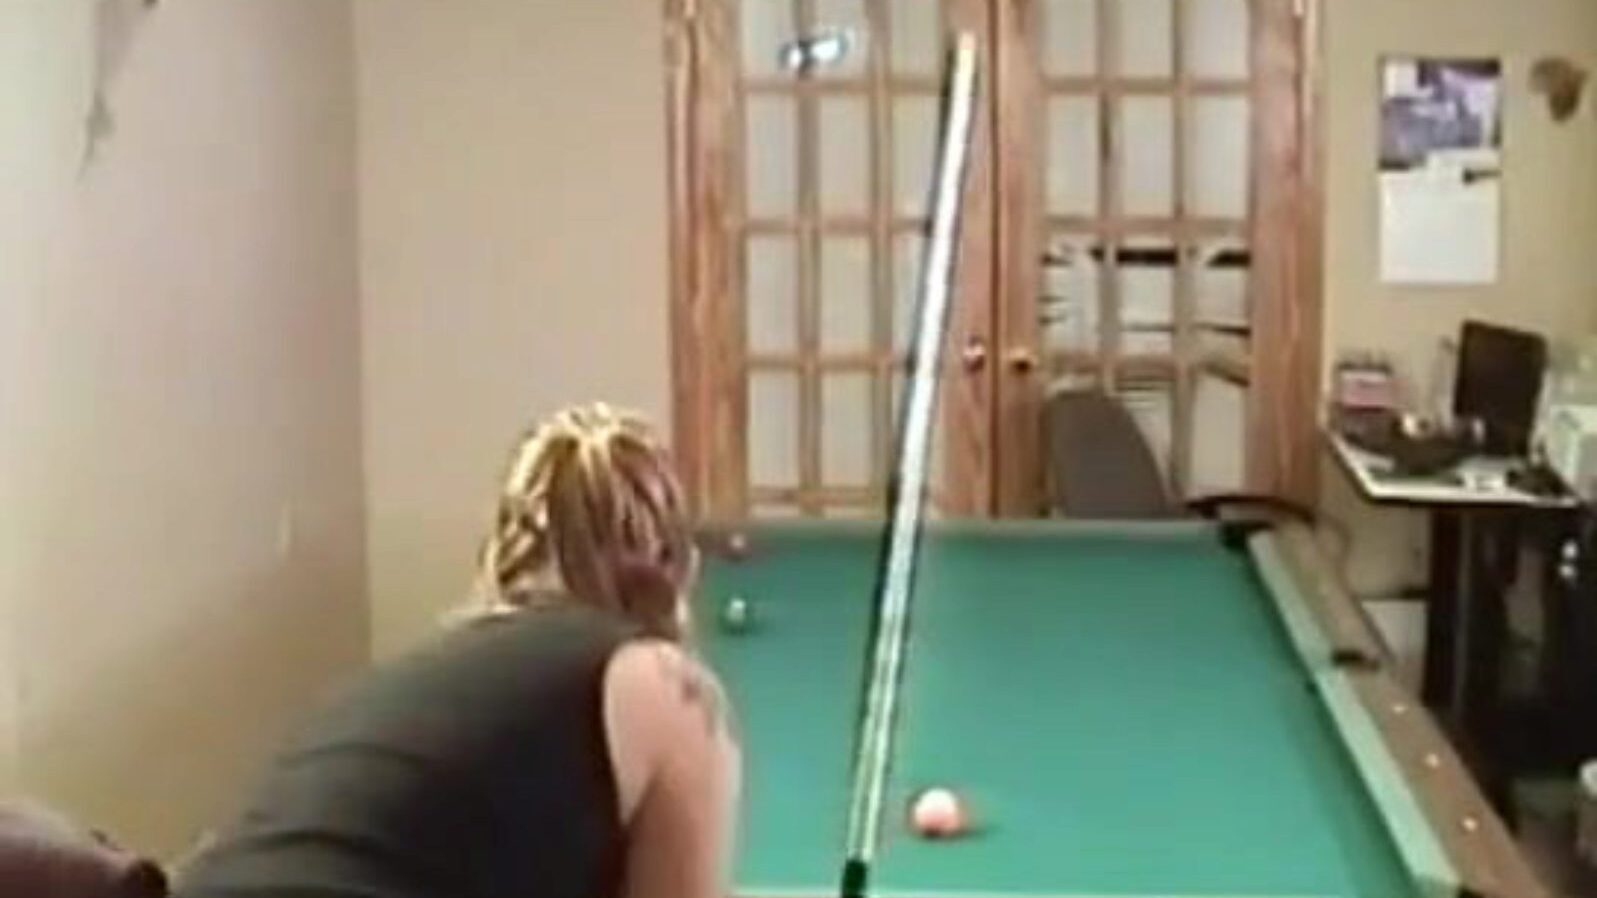 Starla and her paramour were shooting a game of pool